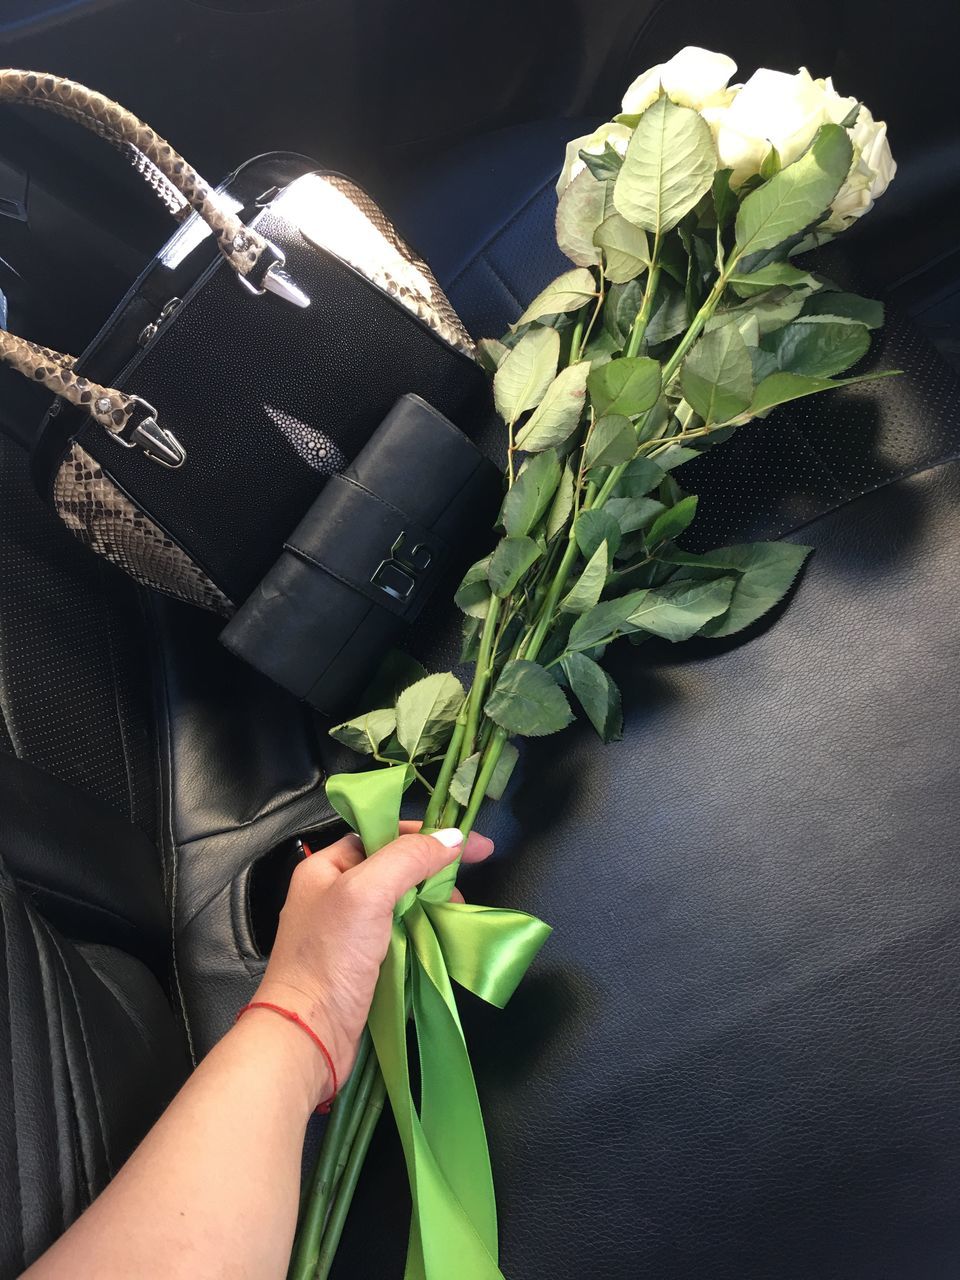 human hand, indoors, real people, human body part, one person, holding, bouquet, close-up, flower, day, freshness, people